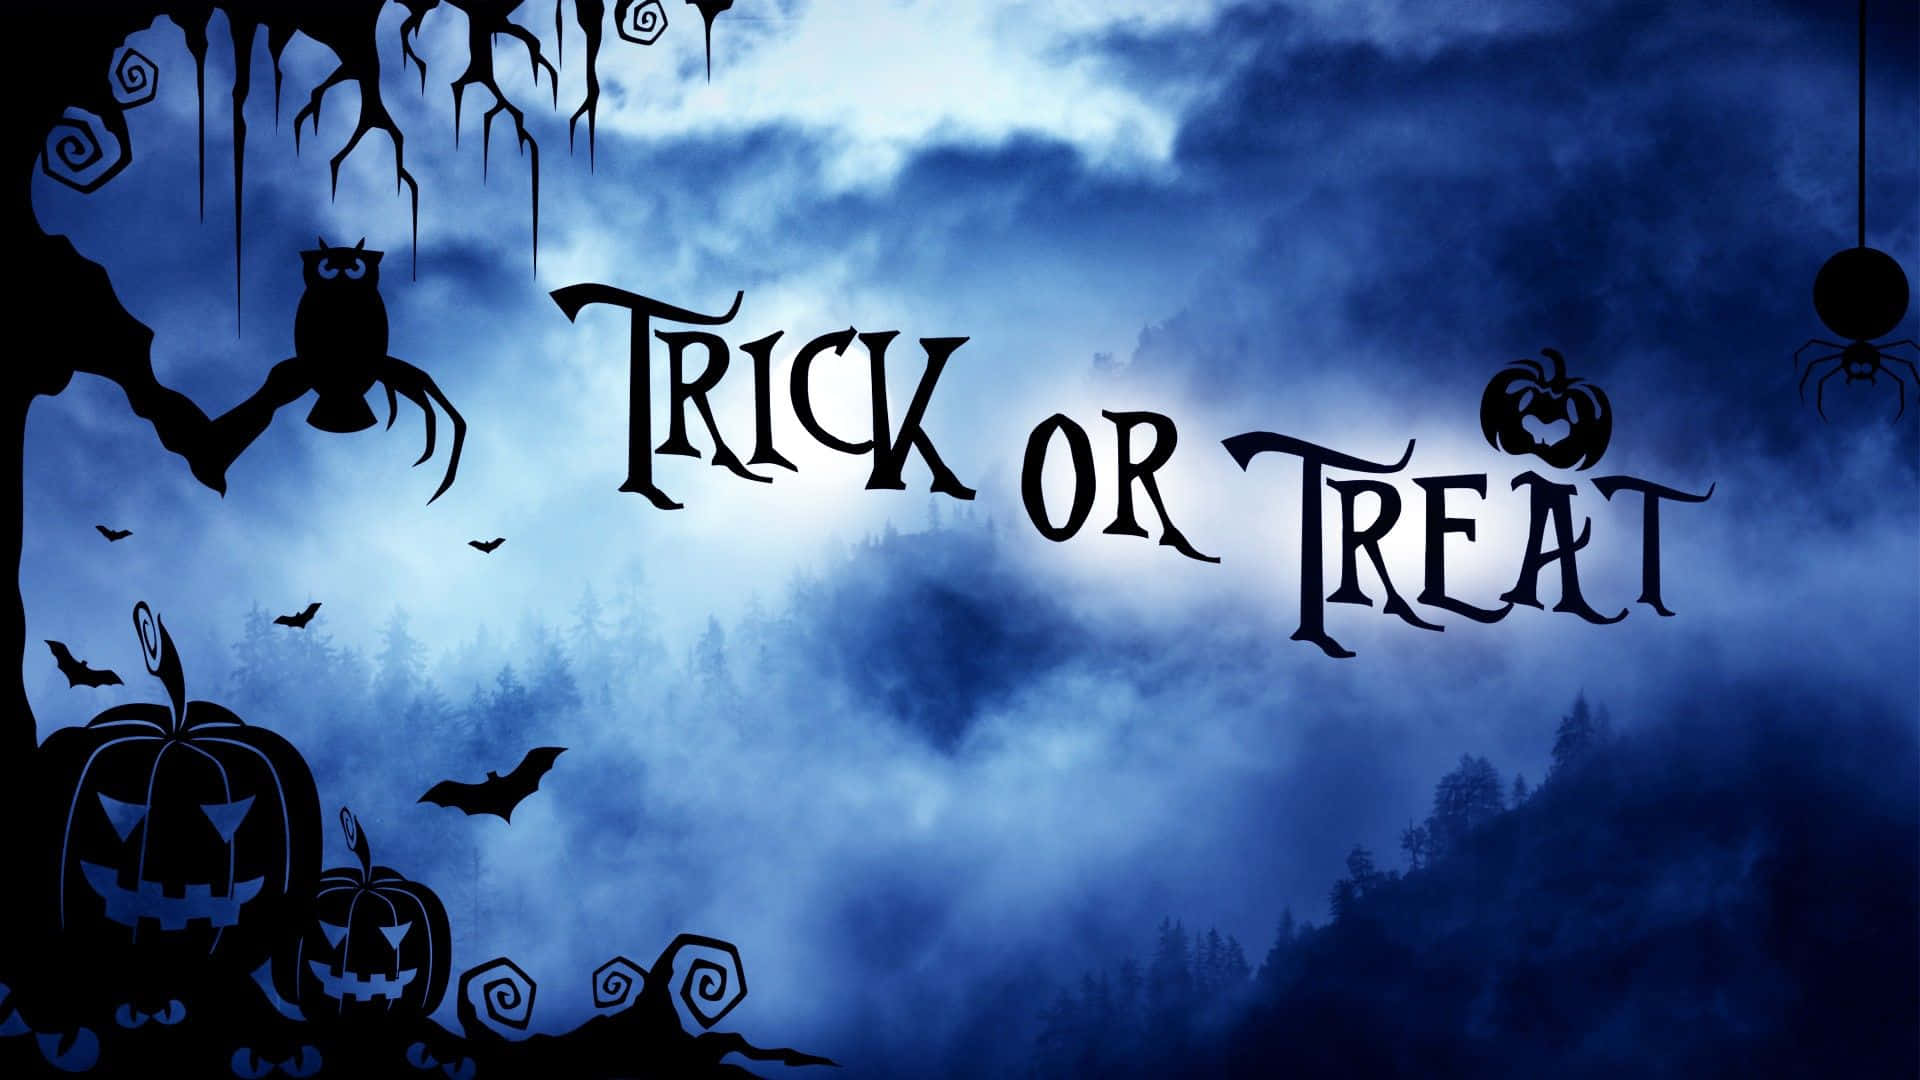 Get ready - Trick-or-Treat is coming! Wallpaper